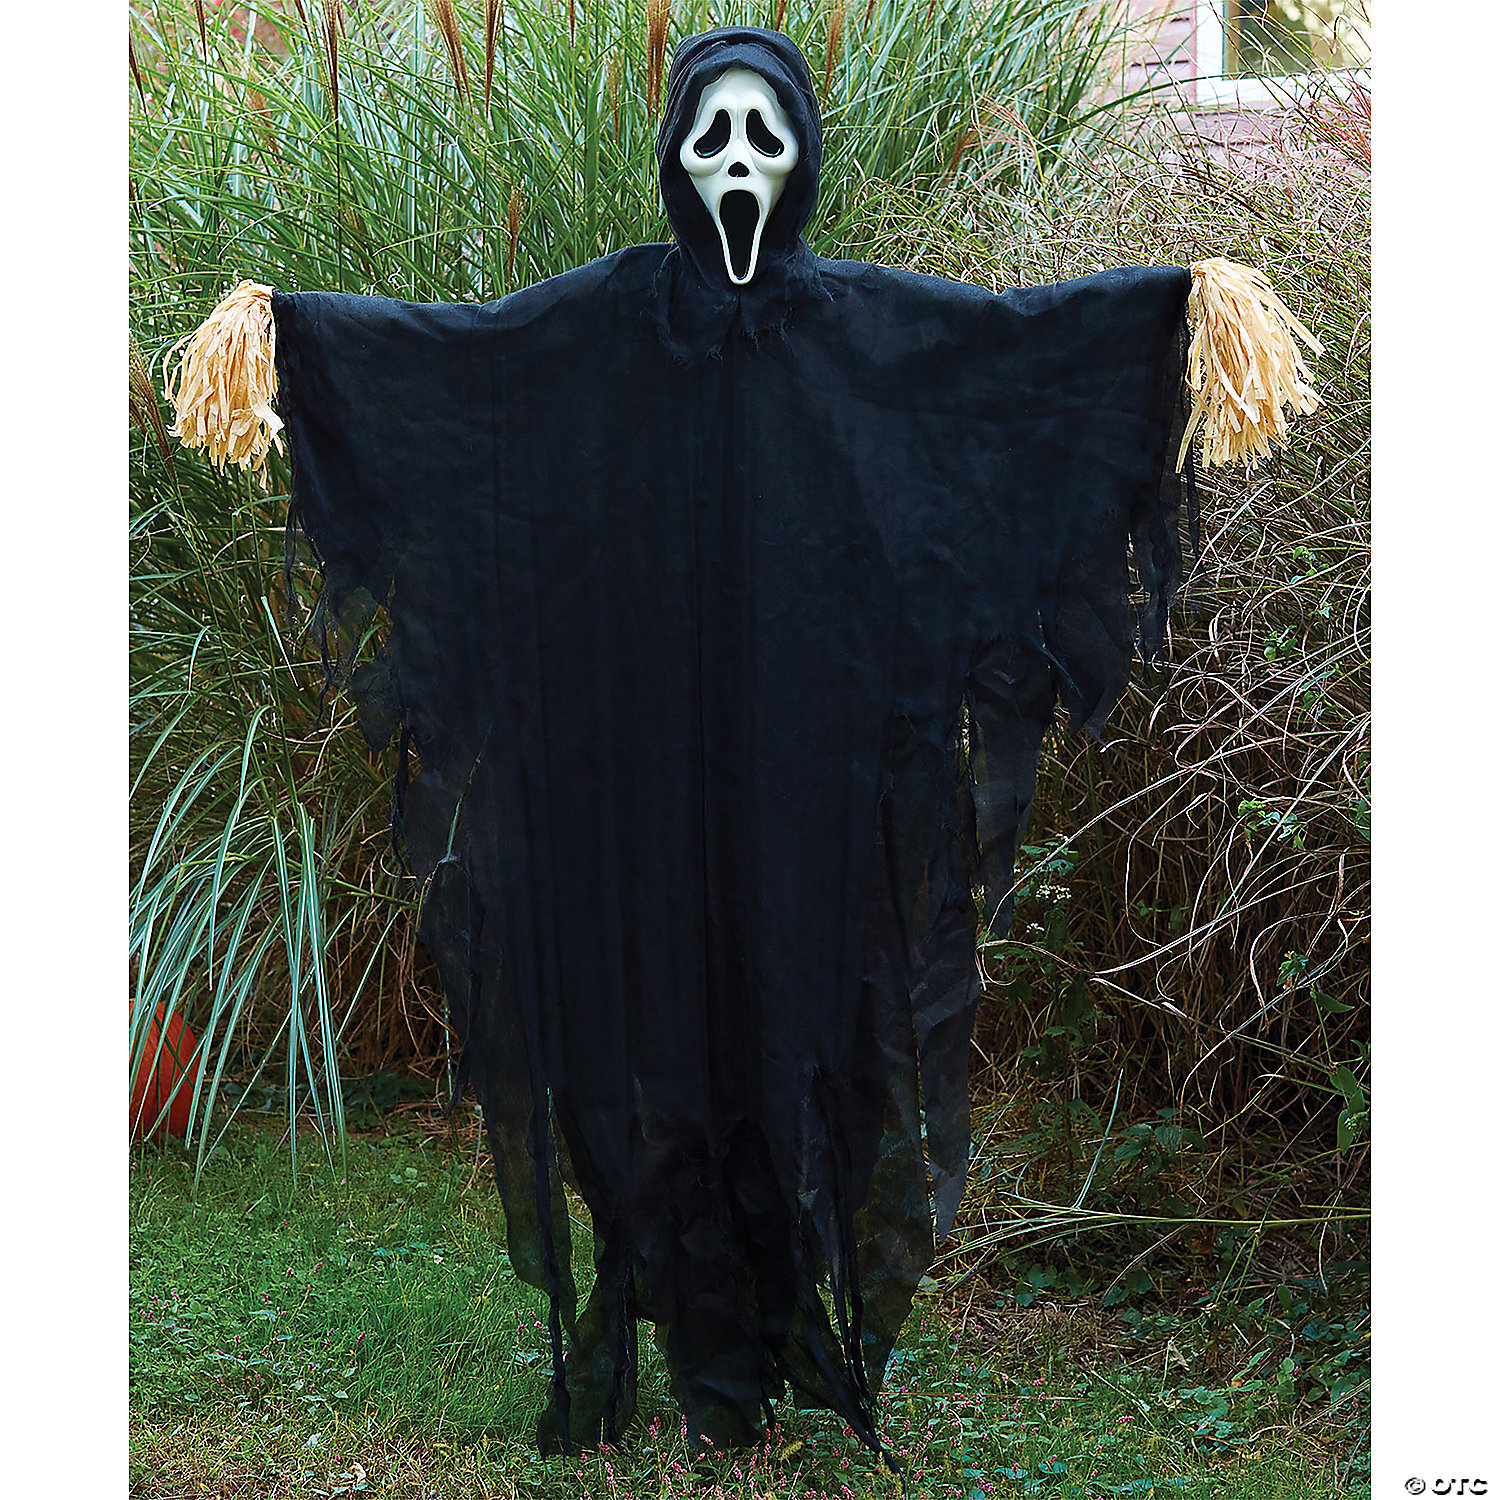 GHOST FACE PROP 5FT SCARECROW - HALLOWEEN